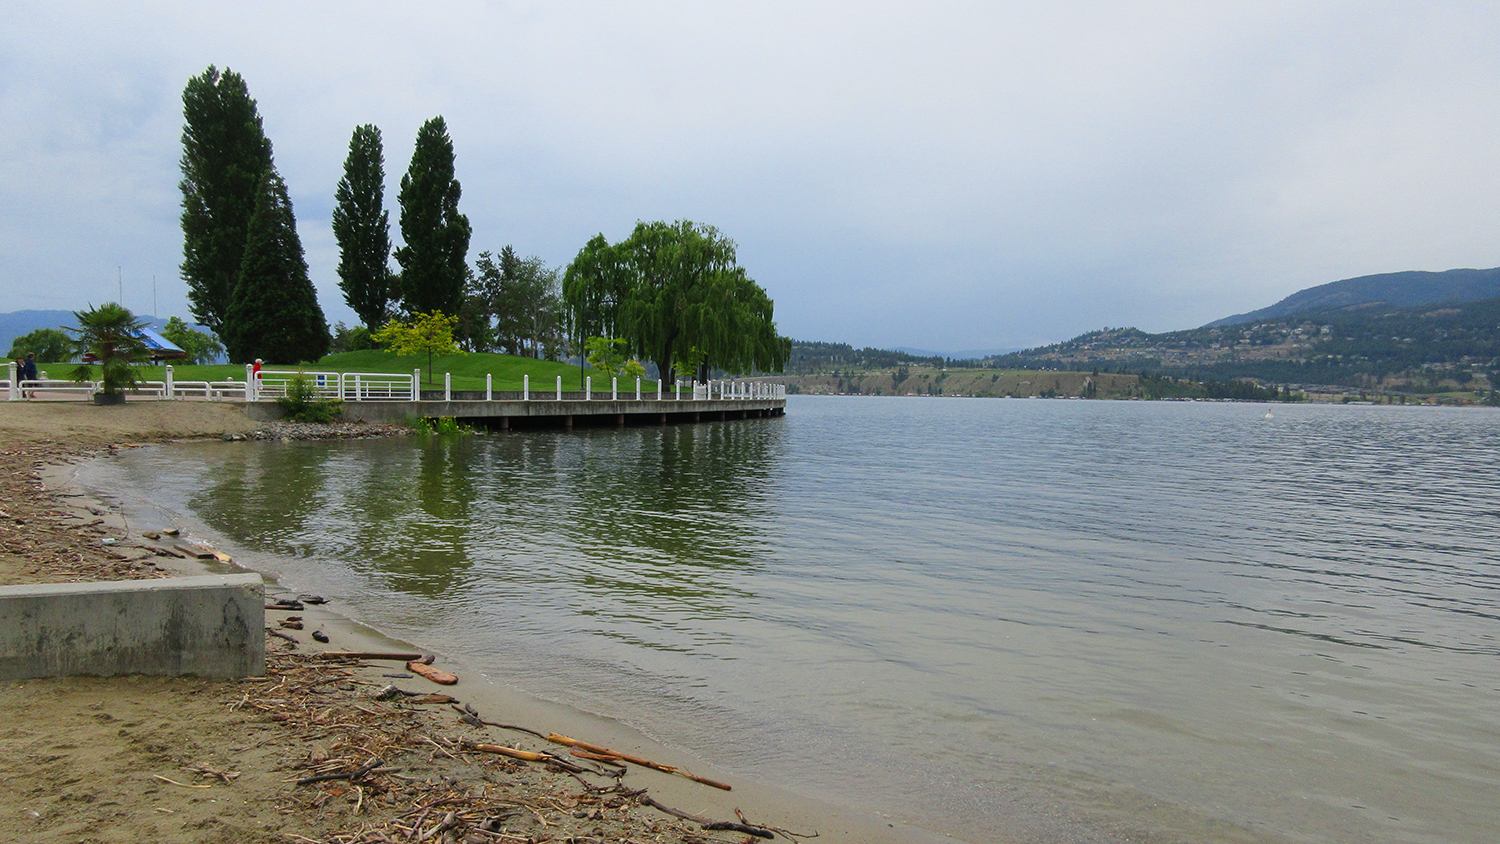 A nature shot of a body of water with a beach, park and walkway to the left and forested mountains in the background.